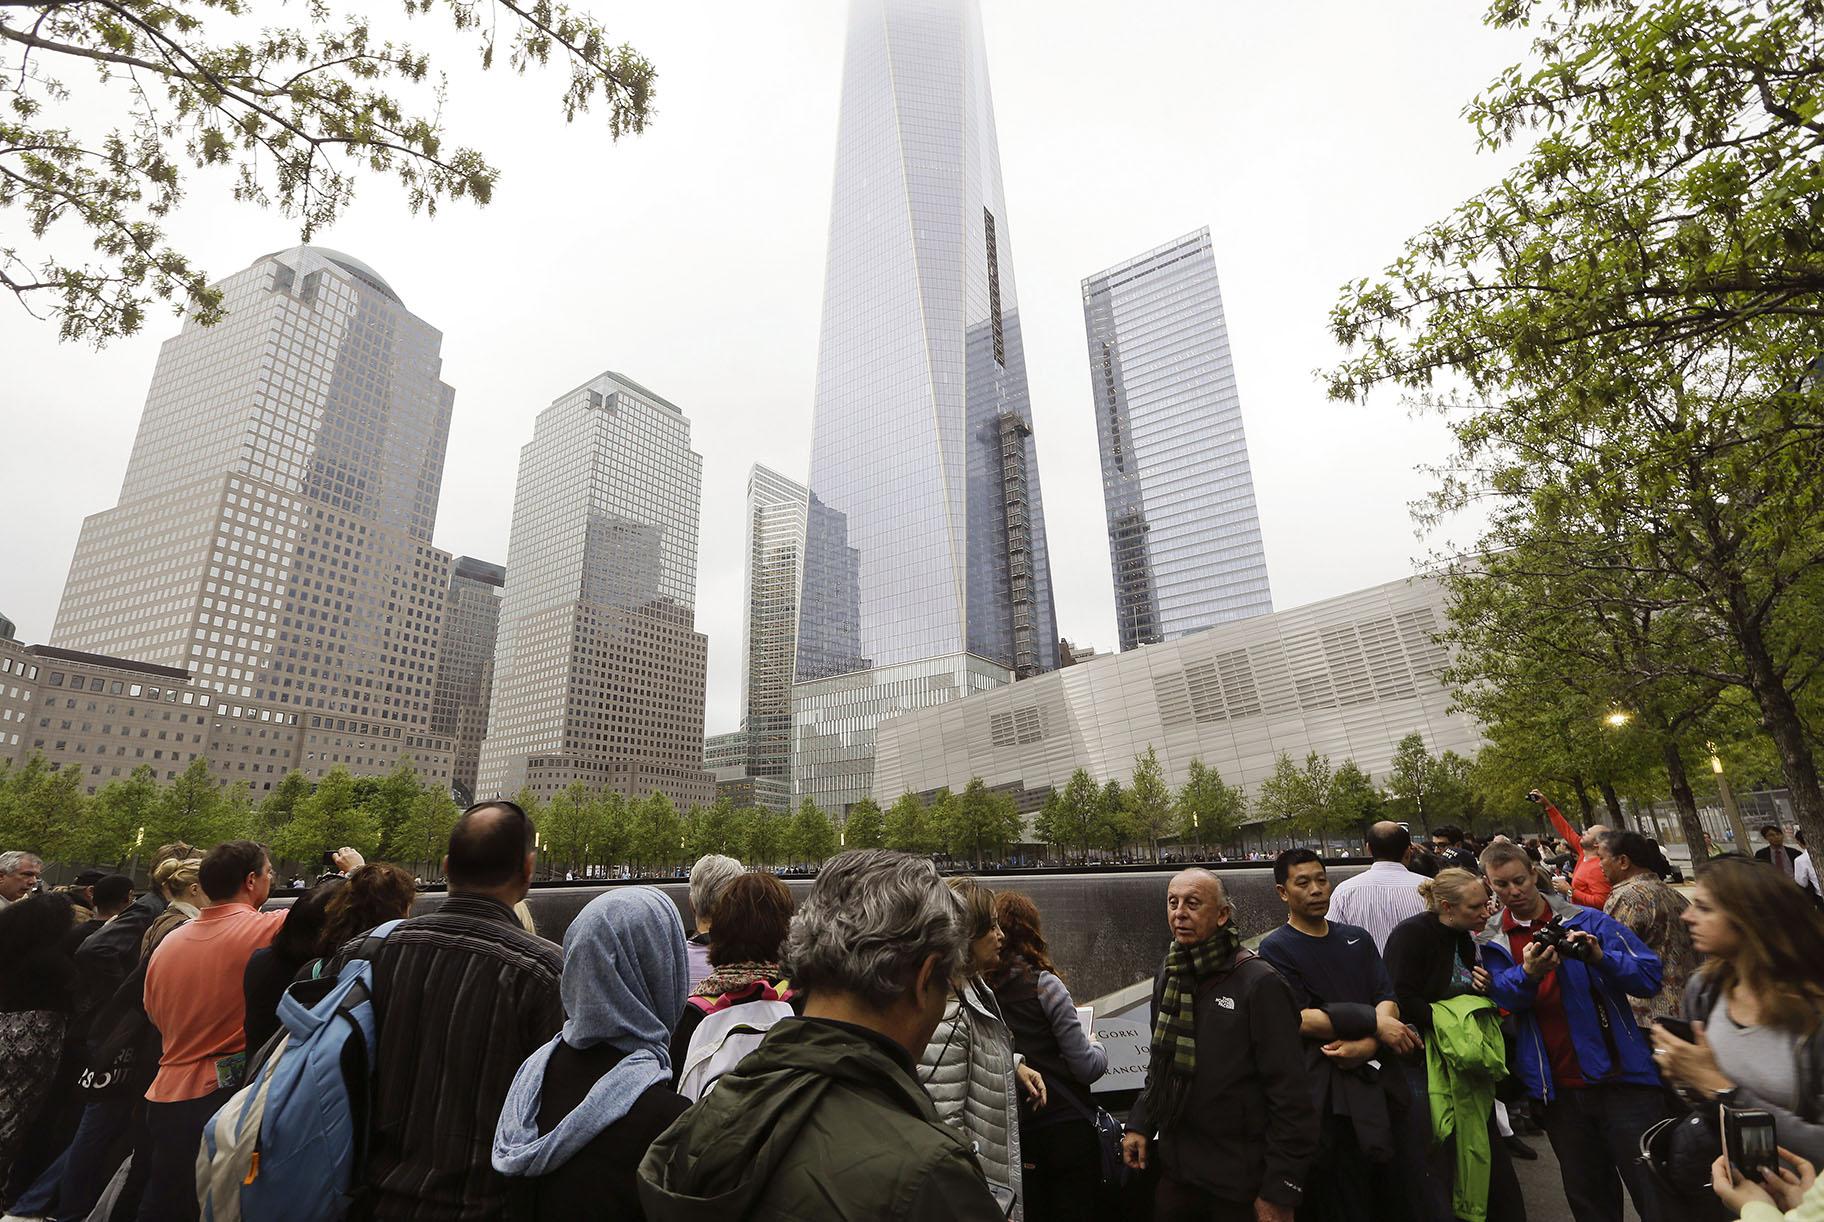 In this May 15, 2015 file photo, visitors gather near the pools at the 9/11 Memorial in New York. As they have done 17 times before, a crowd of victims' relatives is expected at the site on Wednesday, Sept. 11, 2019 to observe the anniversary the deadliest terror attack on American soil. (AP Photo / Frank Franklin II)